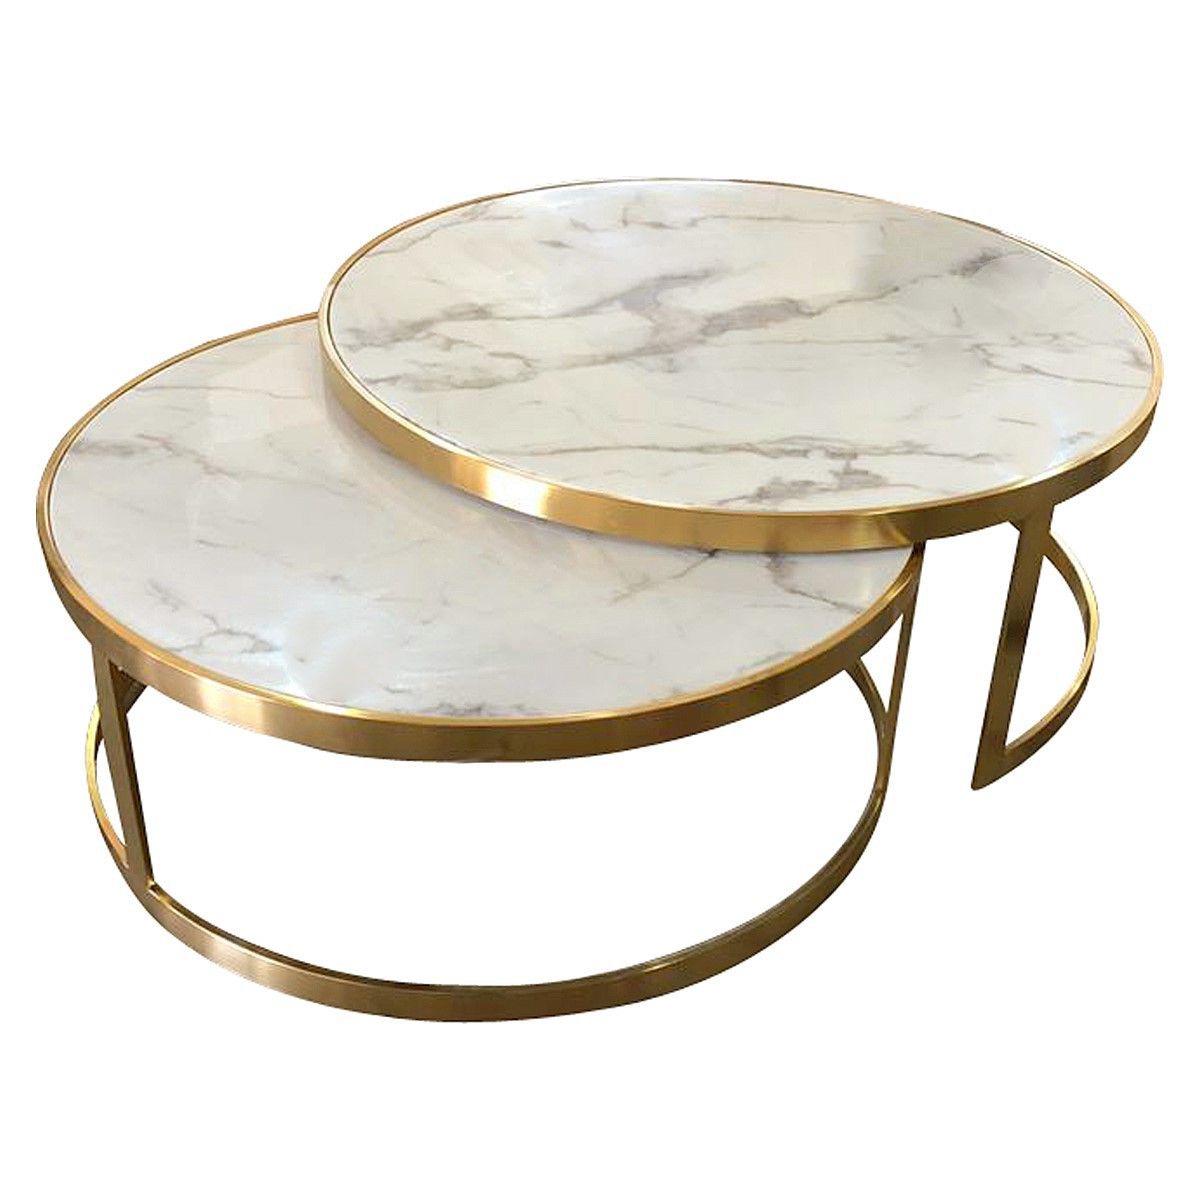 Most Recent Faux Marble Coffee Tables Throughout Mirabello 2 Piece Faux Marble Topped Metal Round Nesting (Gallery 15 of 20)